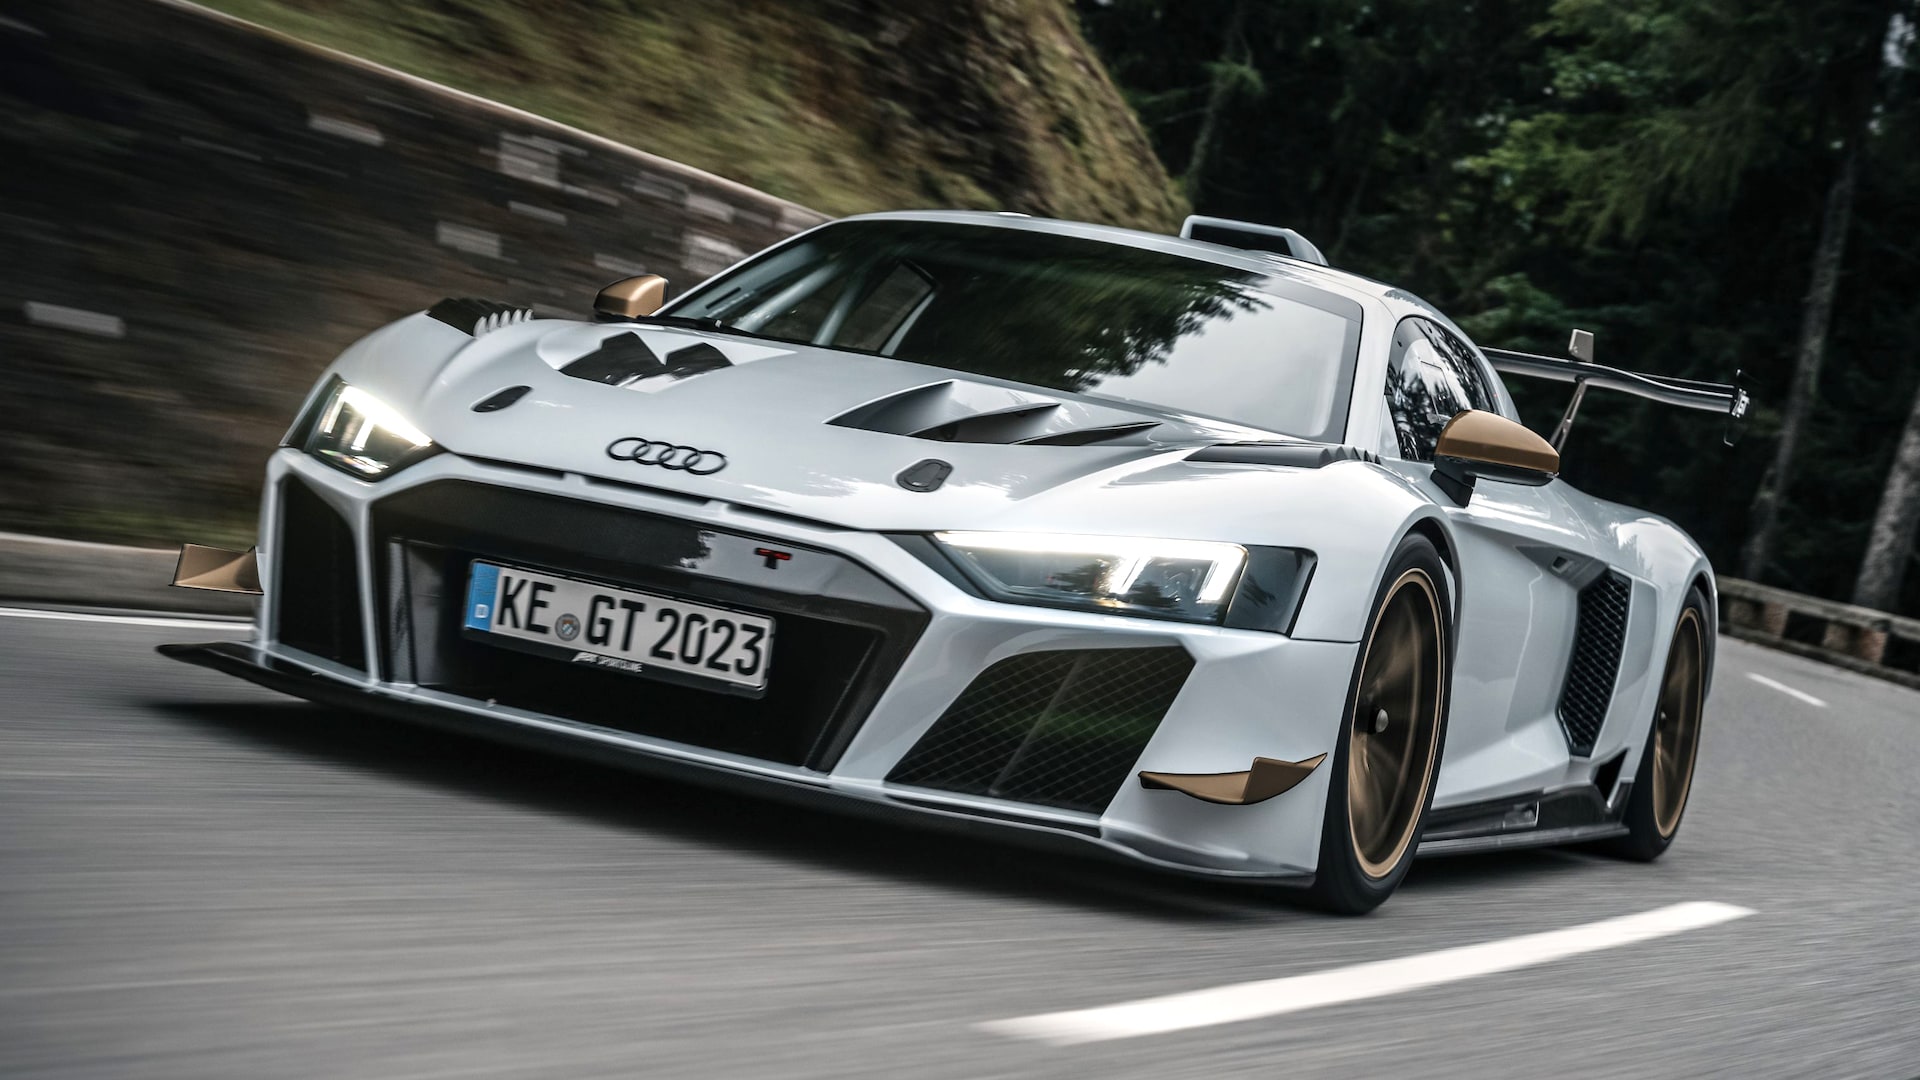 The outrageous Abt XGT is an Audi R8 DTM racer for the road